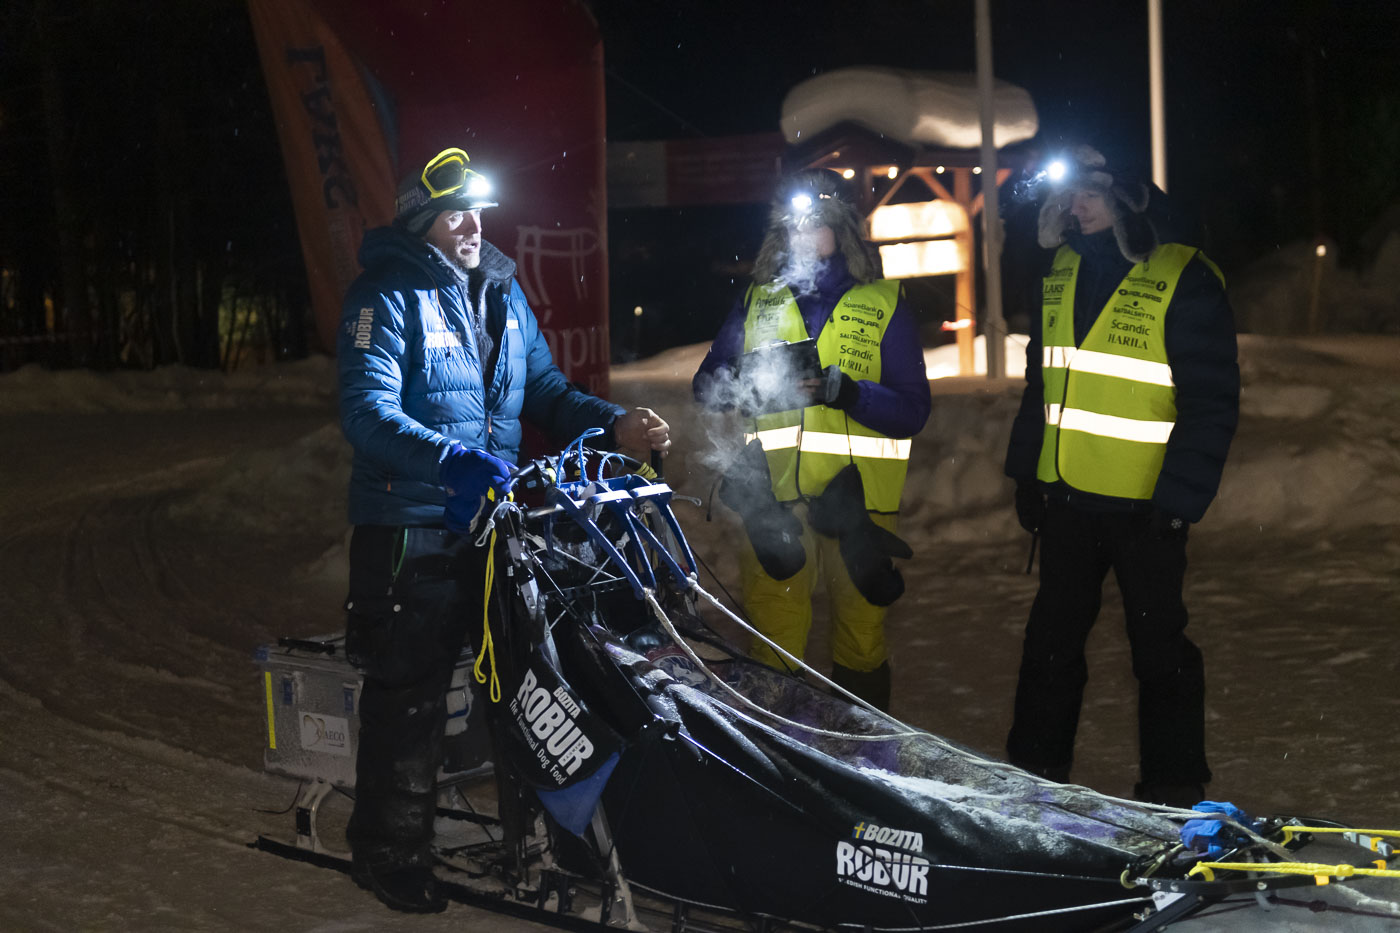 Petter Karlsson stops to check in with race officials at the Karasjok checkpoint toward the end of the 2019 Finnmarksløpet race...